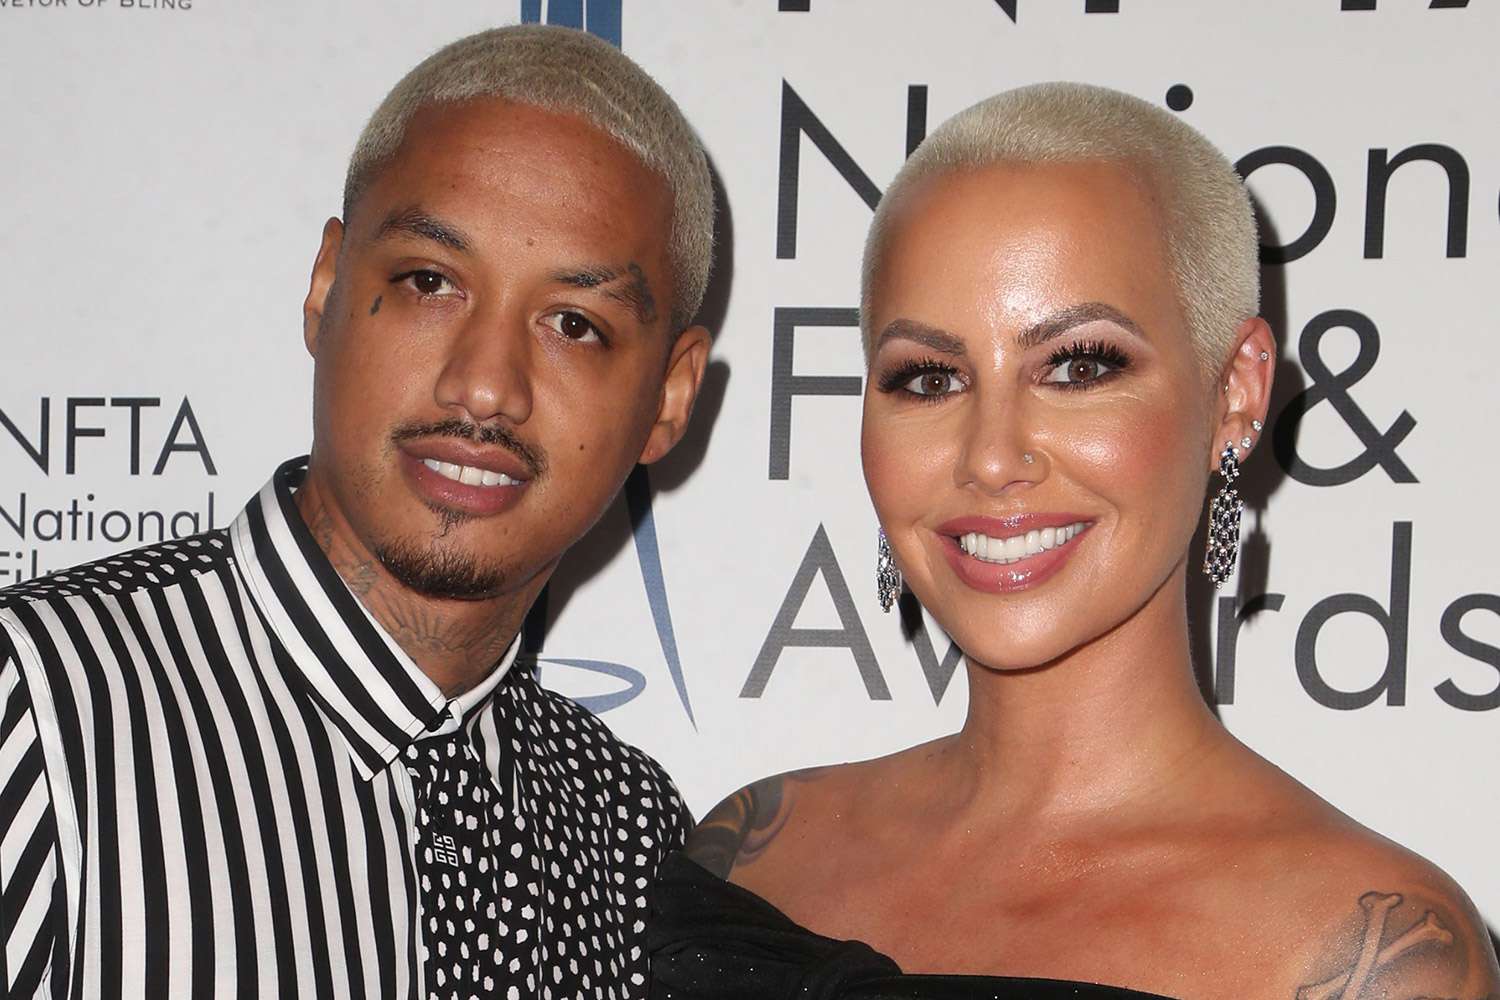 Amber Rose's Partner Alexander 'AE' Edwards Admits to Cheating on Her with 12 女性